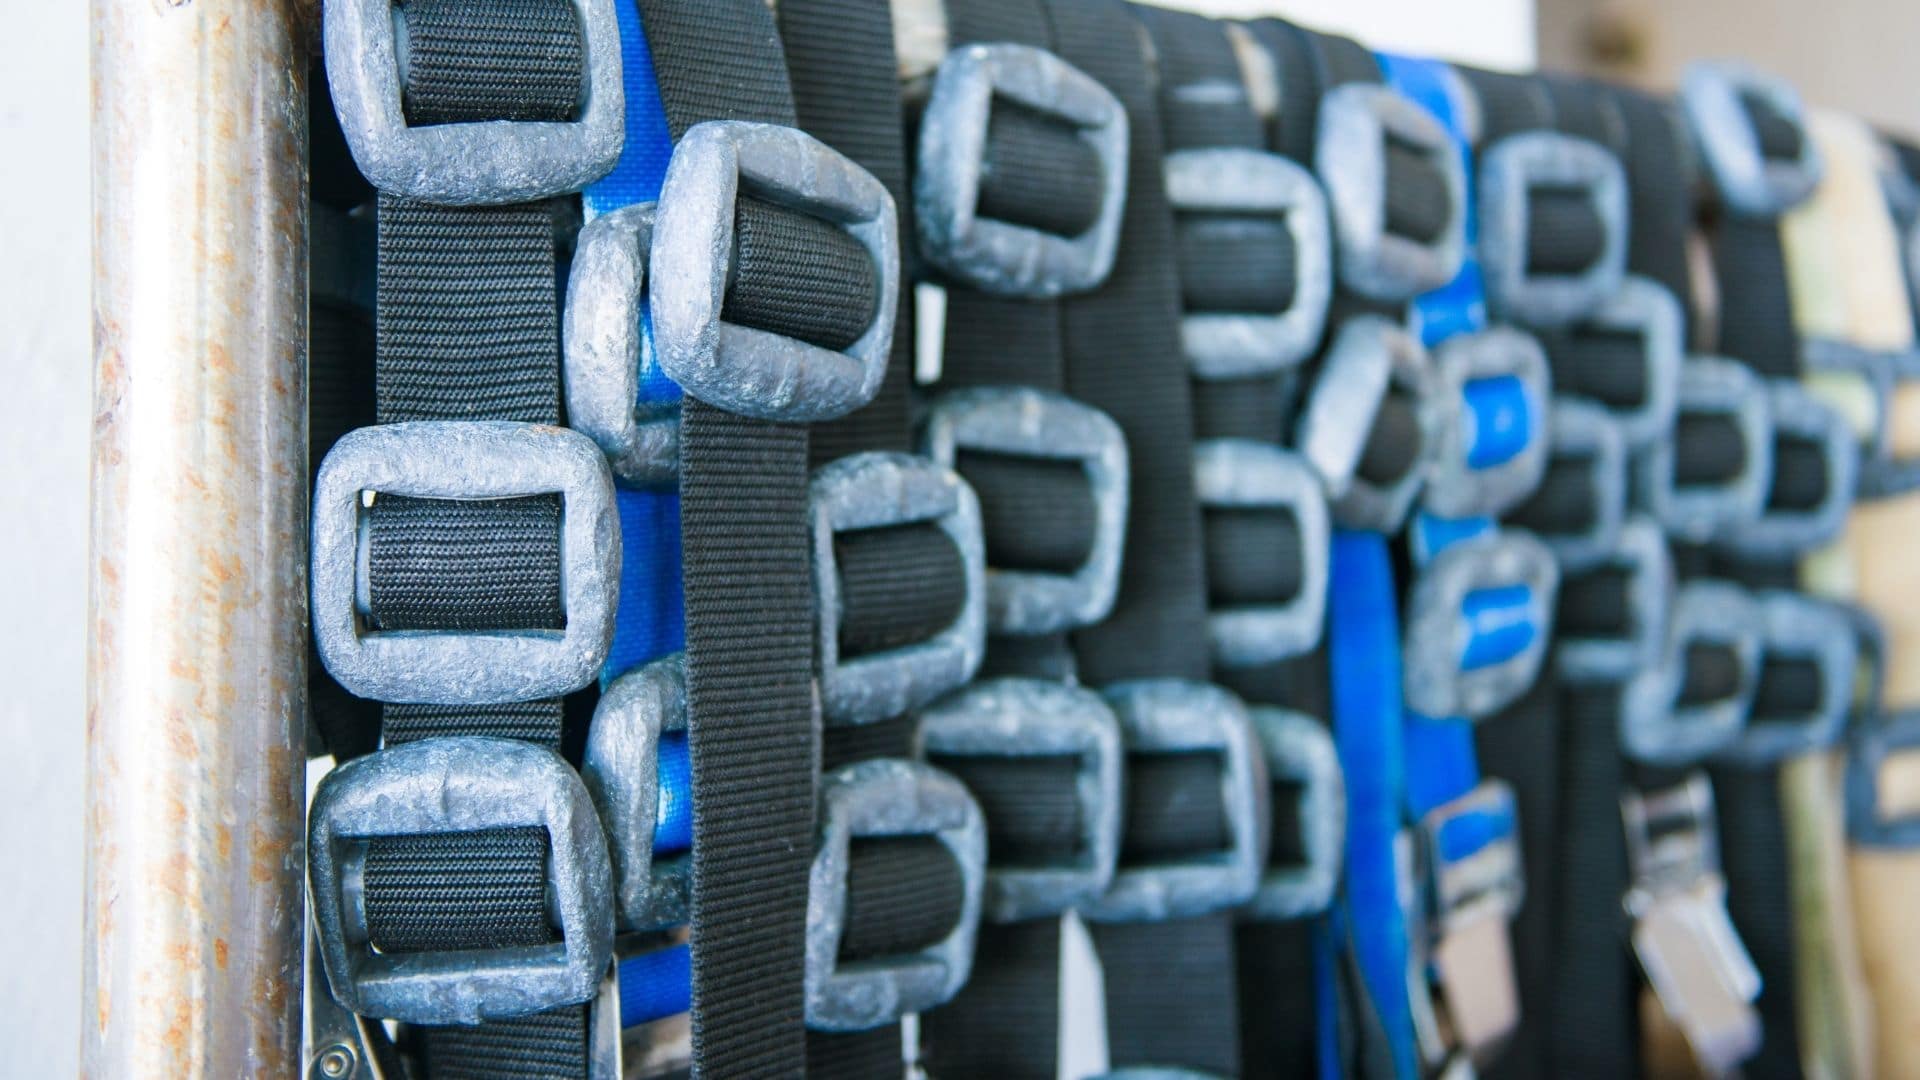 image showing dive weights and dive weight belts drying on a rack